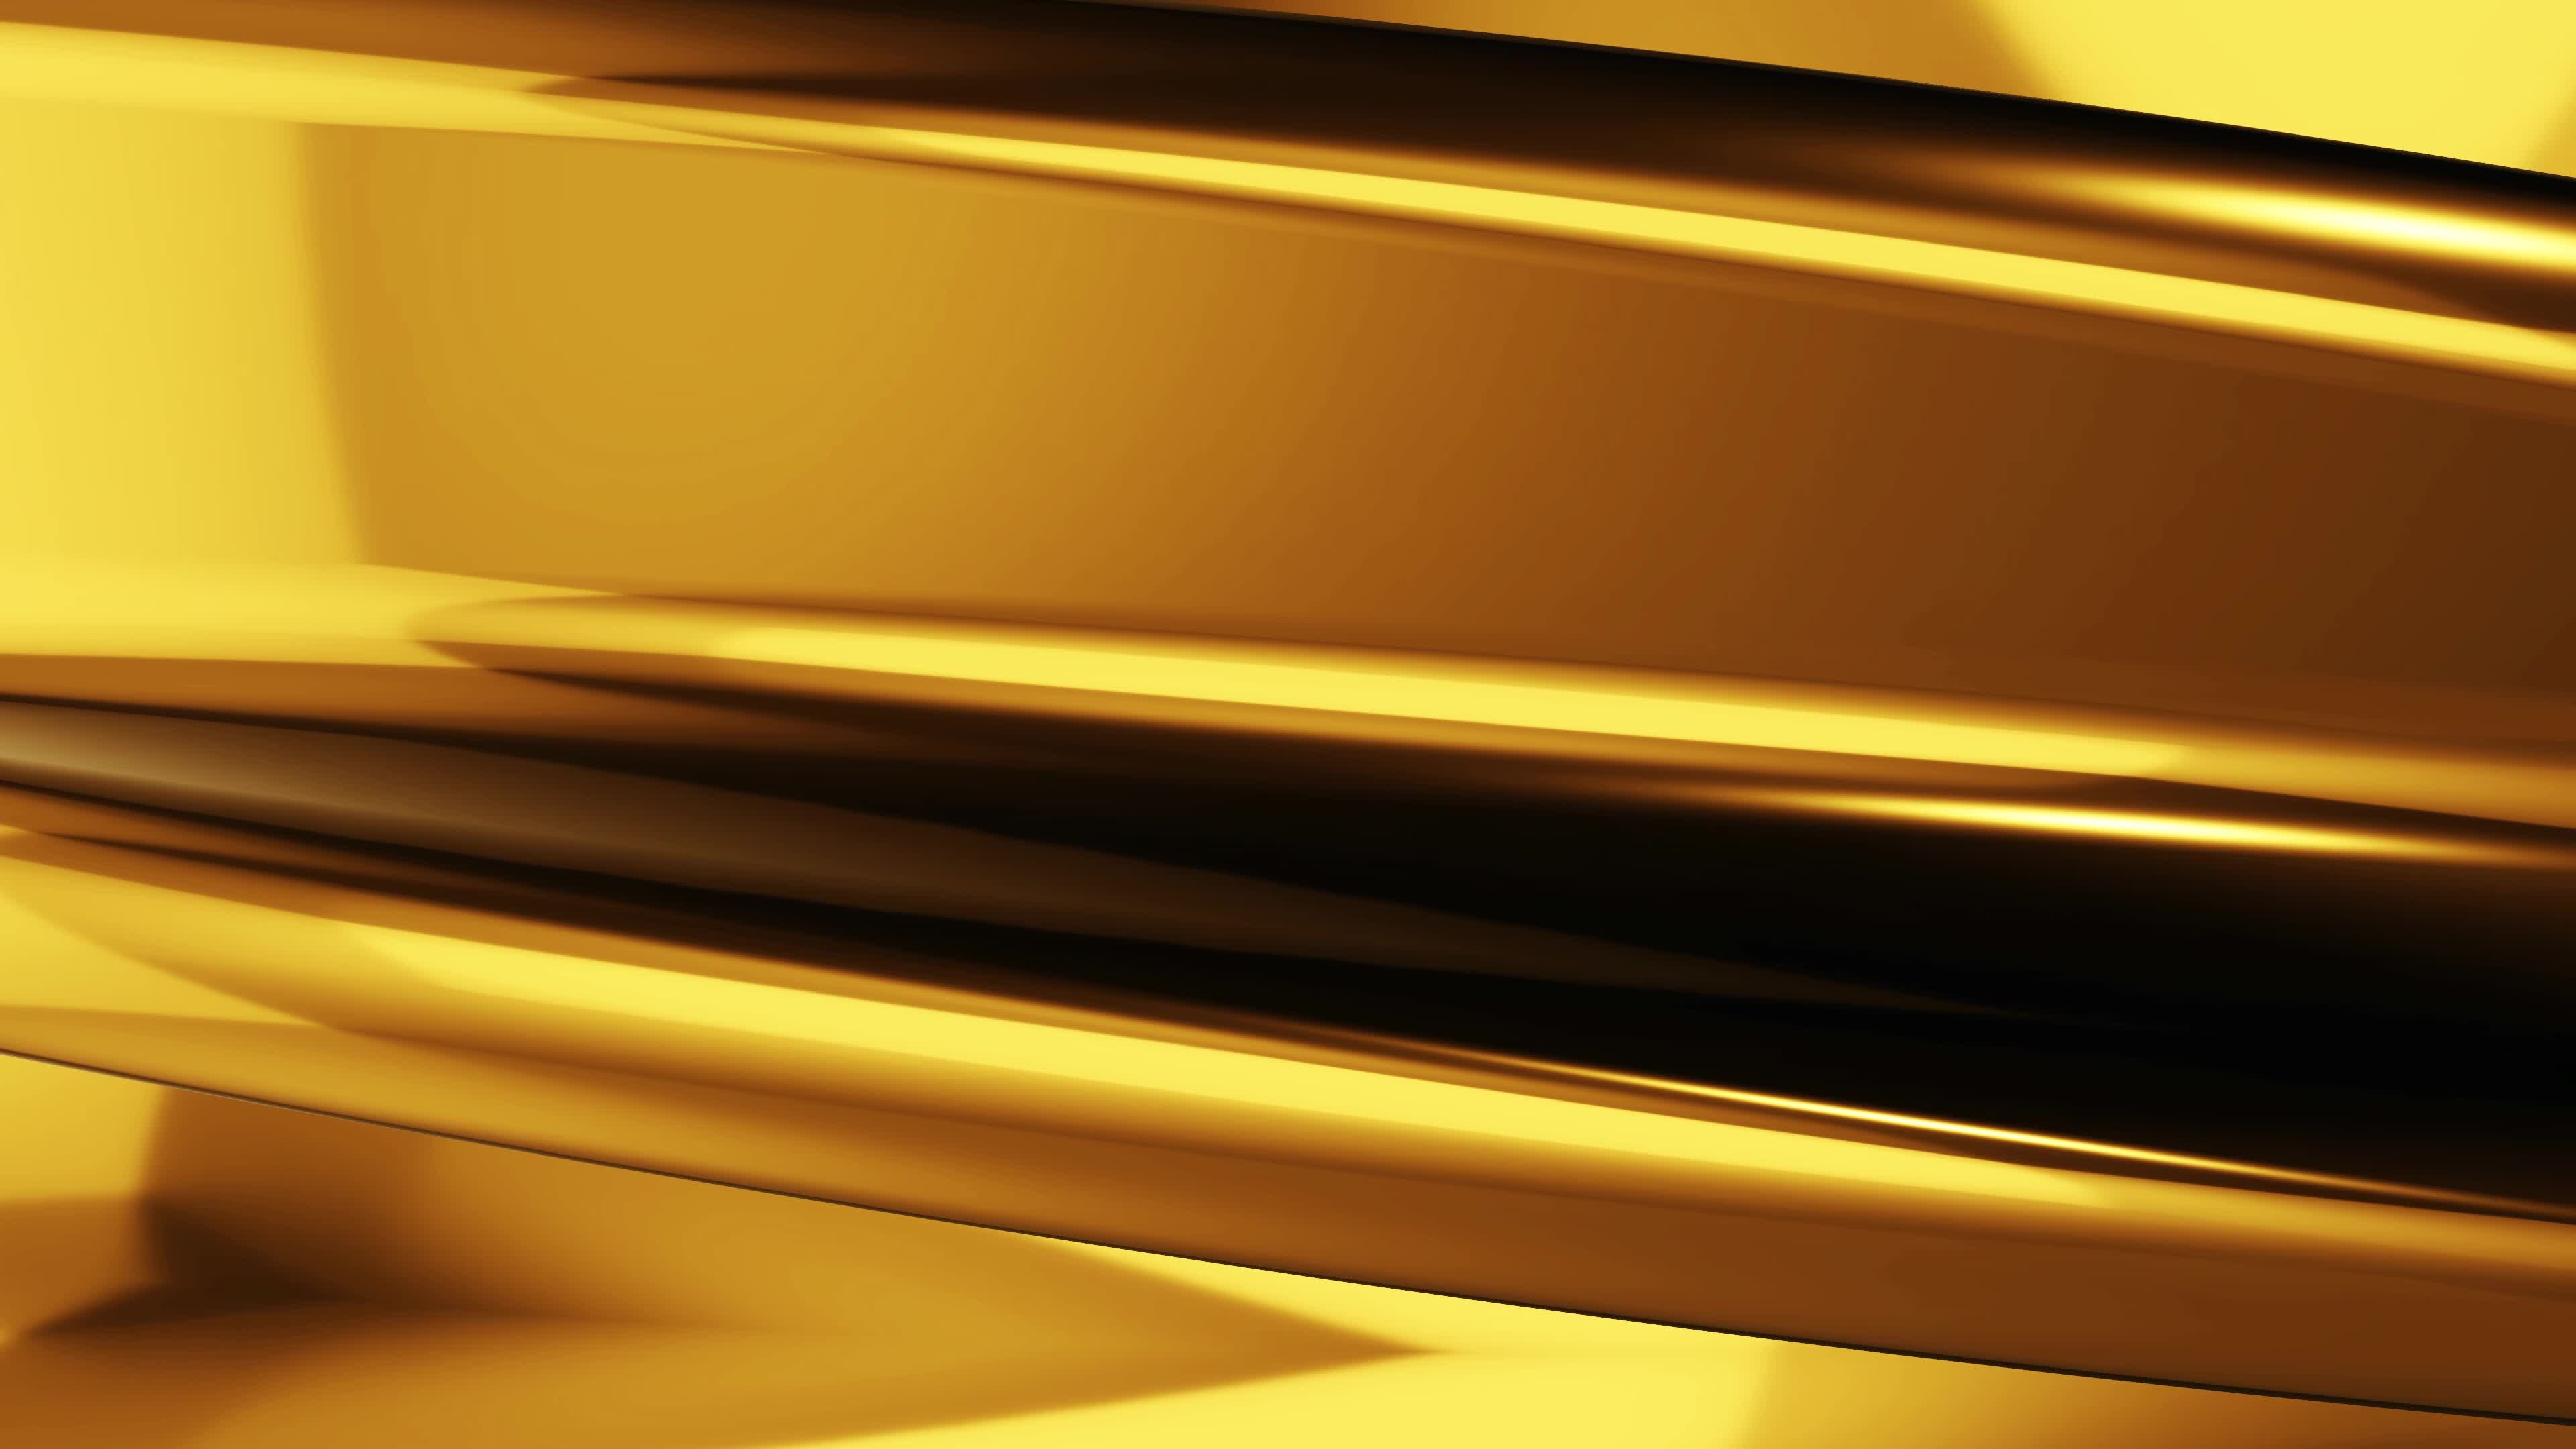 Gold: A chemical element with the symbol Au, Bright, slightly orange-yellow, ductile metal in a pure form. 3840x2160 4K Wallpaper.